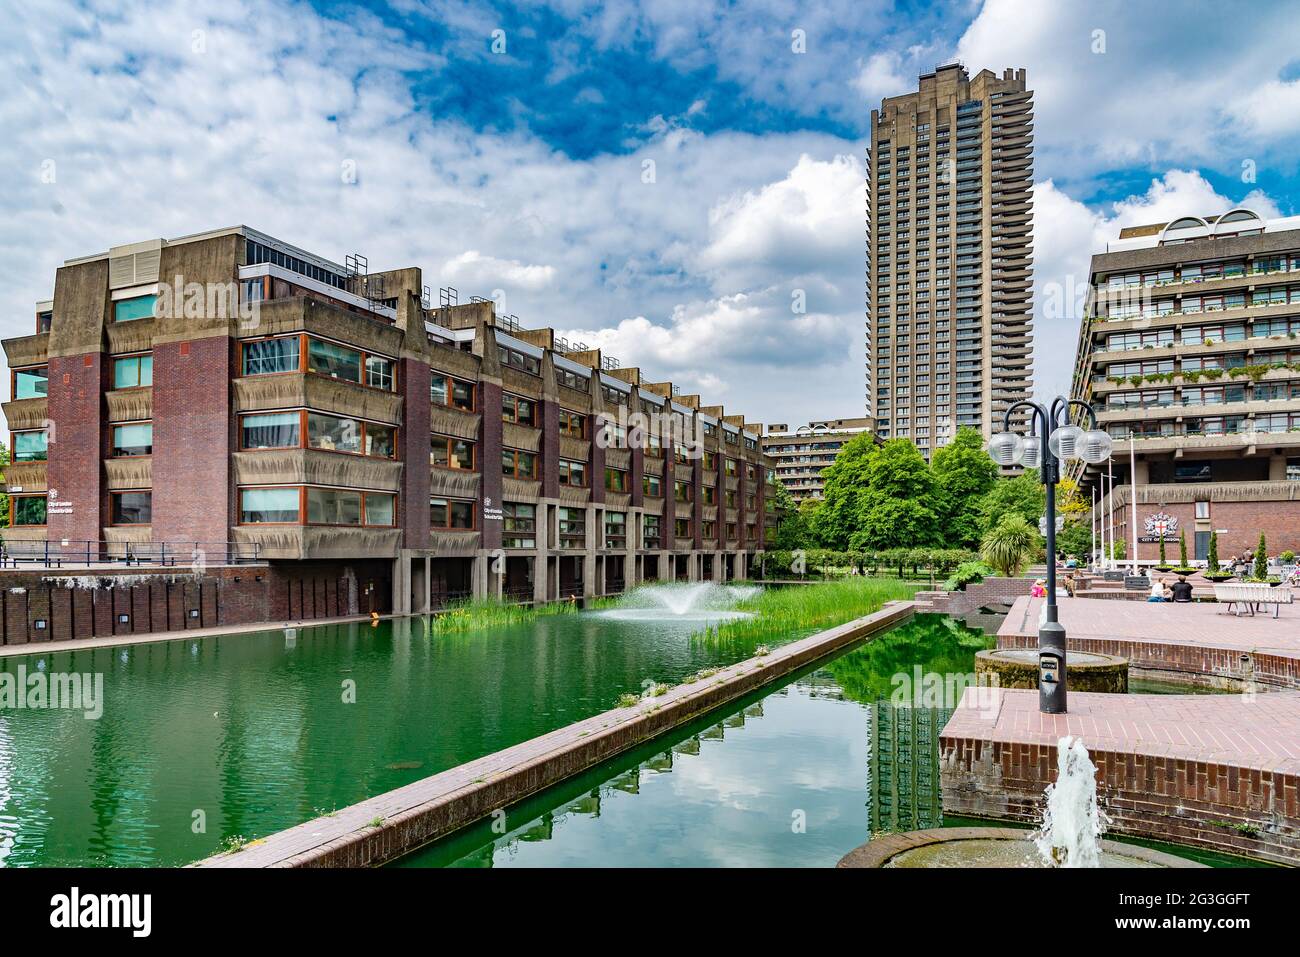 A view of the Barbican Estate, London, UK Stock Photo